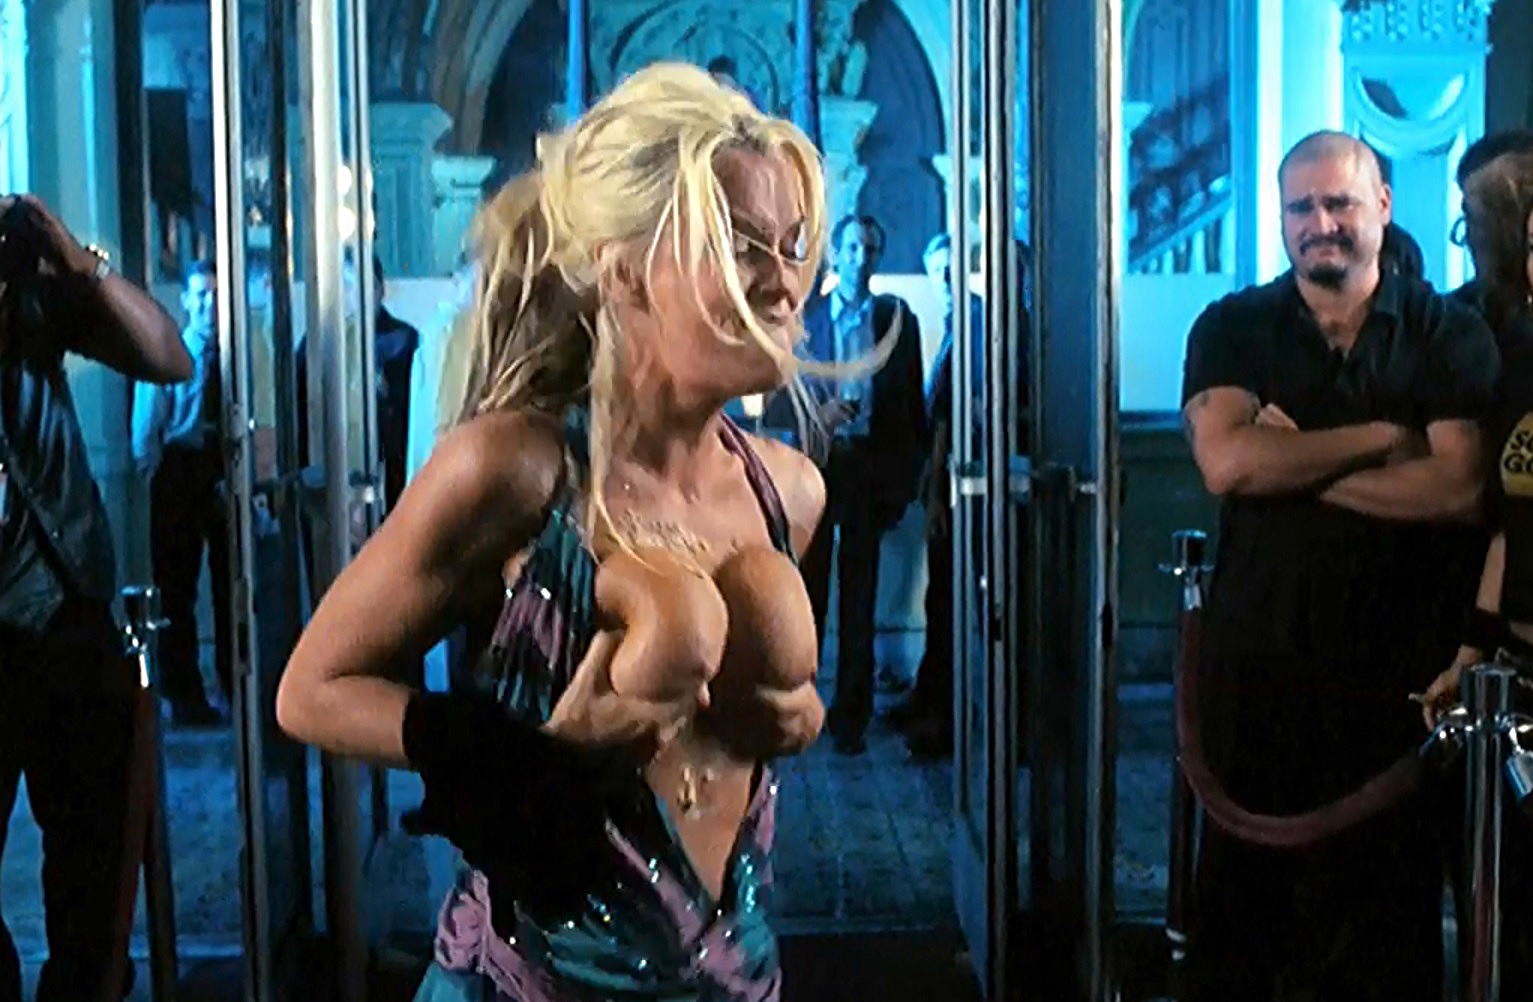 Jenny Mccarthy Blowjob - Jenny McCarthy Nude Boobs In Dirty Love Movie - FREE VIDEO